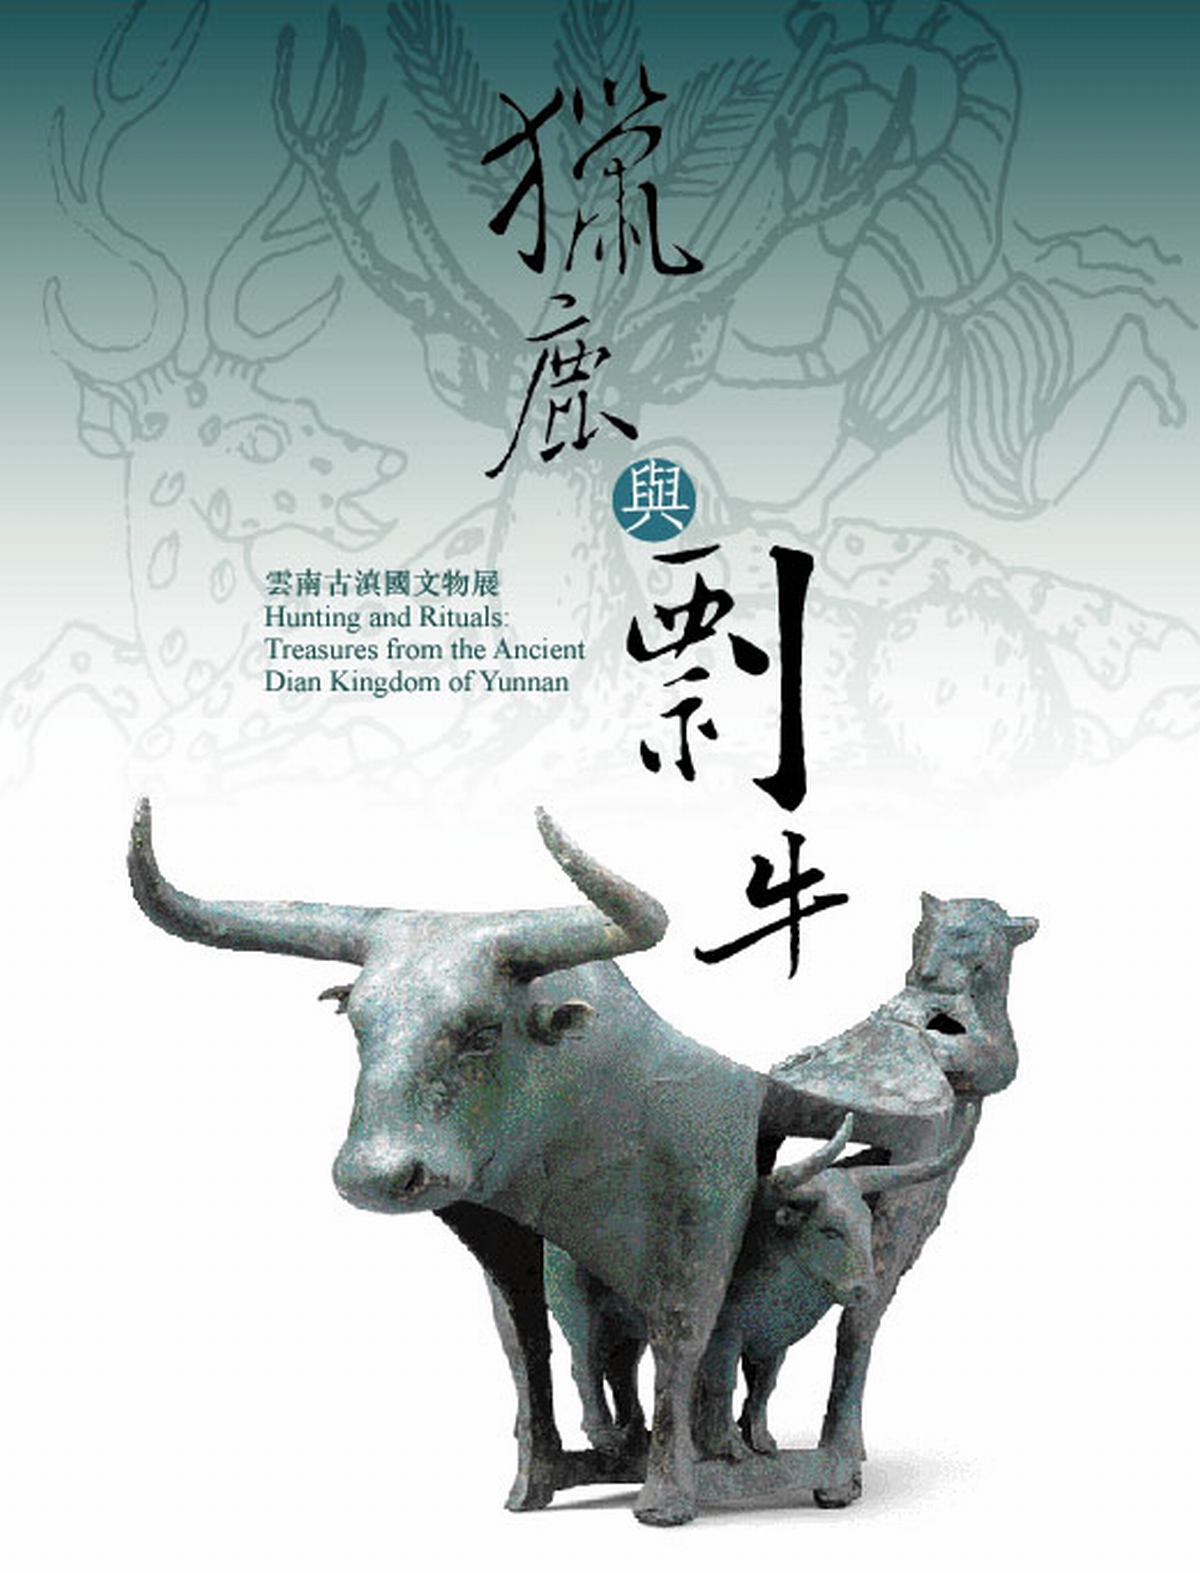 Hunting and Rituals – Treasures from the Ancient Dian Kingdom of Yunnan